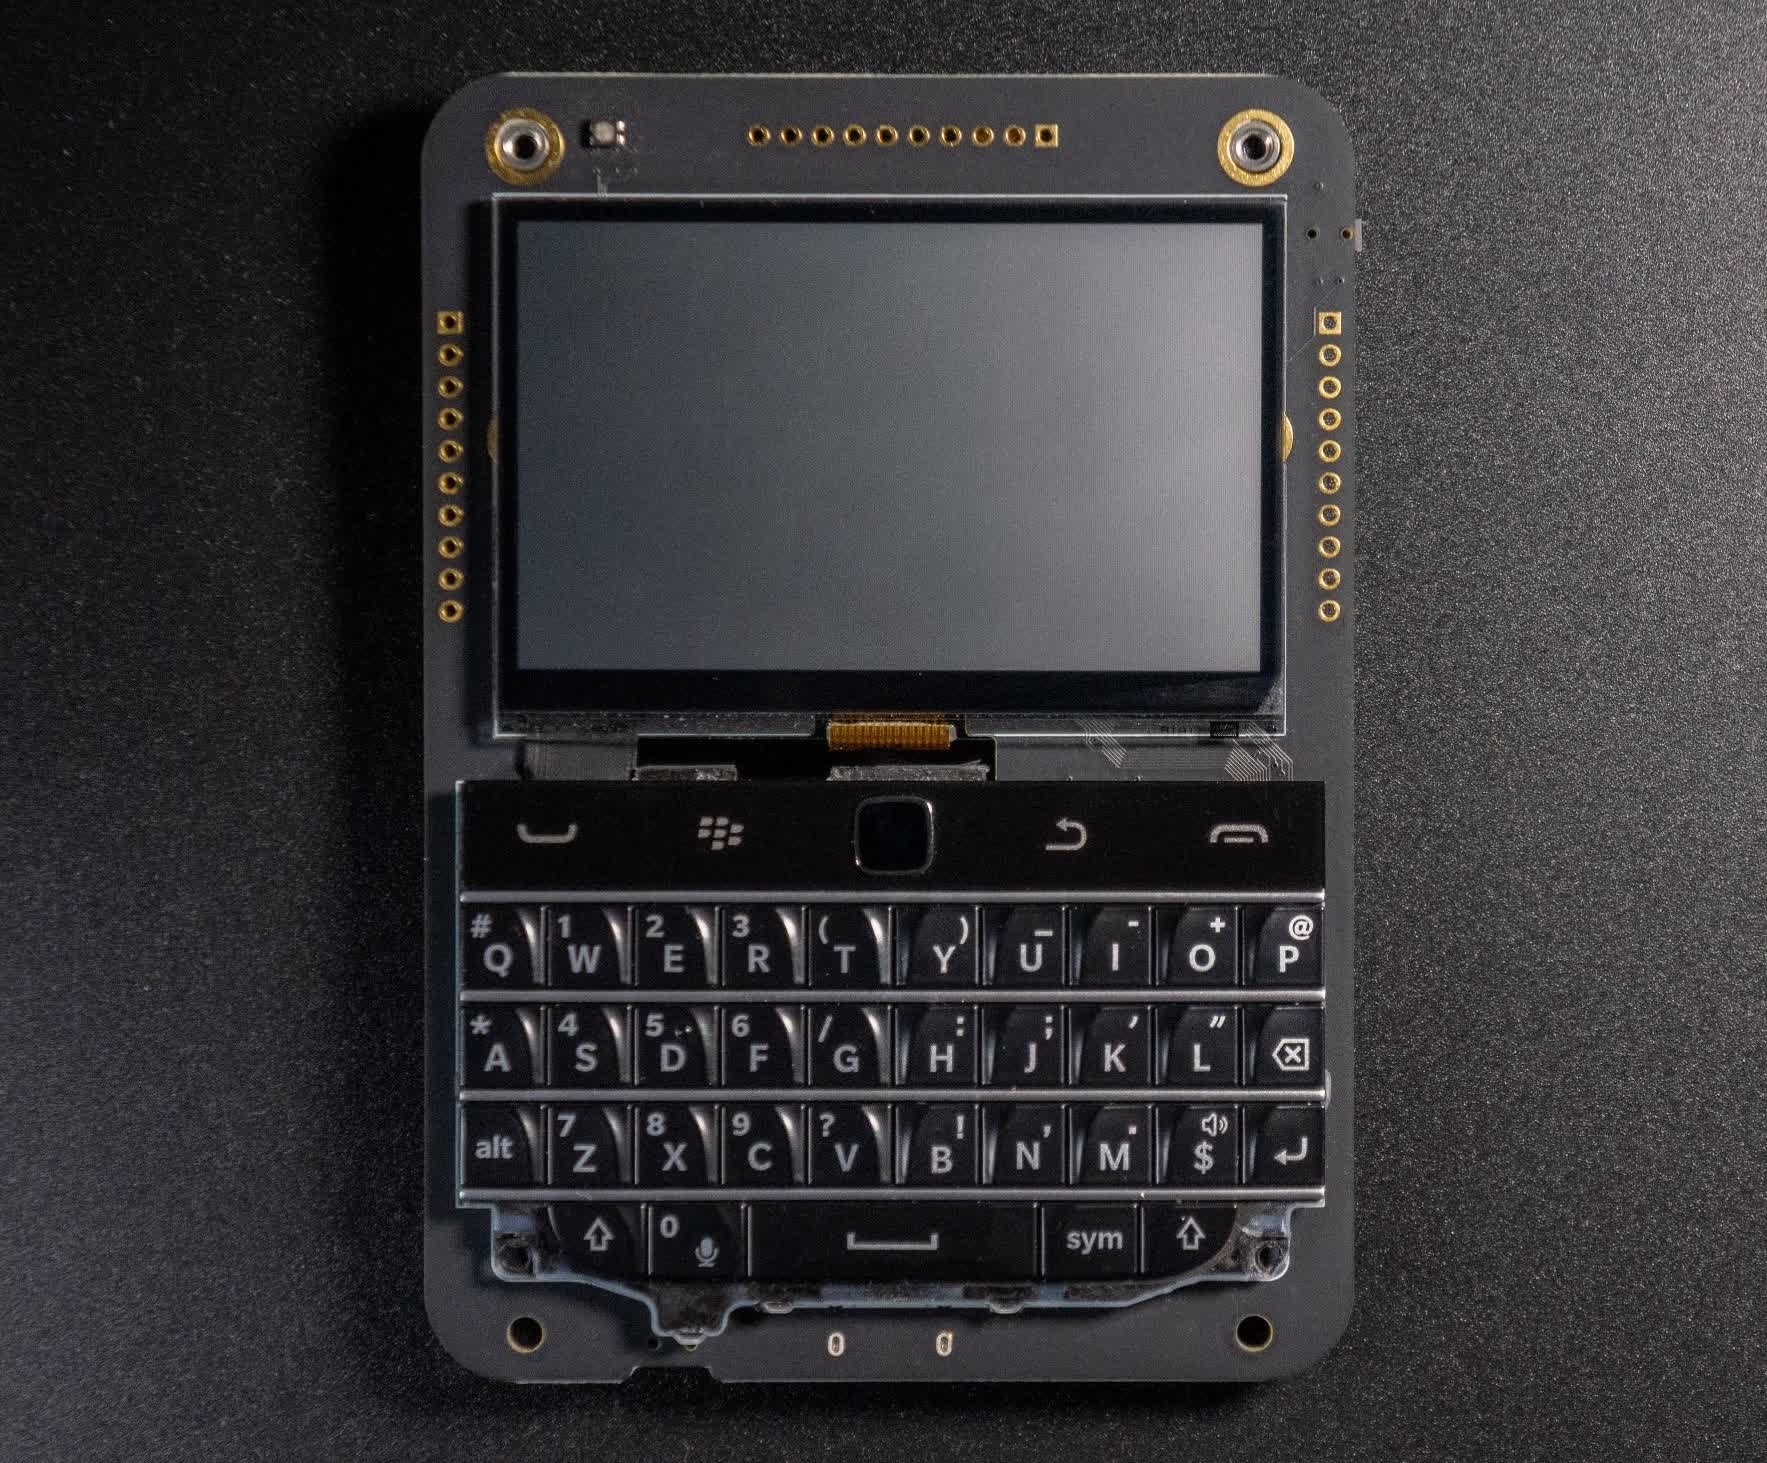 The Beepberry is a cross between a BlackBerry, a Raspberry Pi, and a calculator